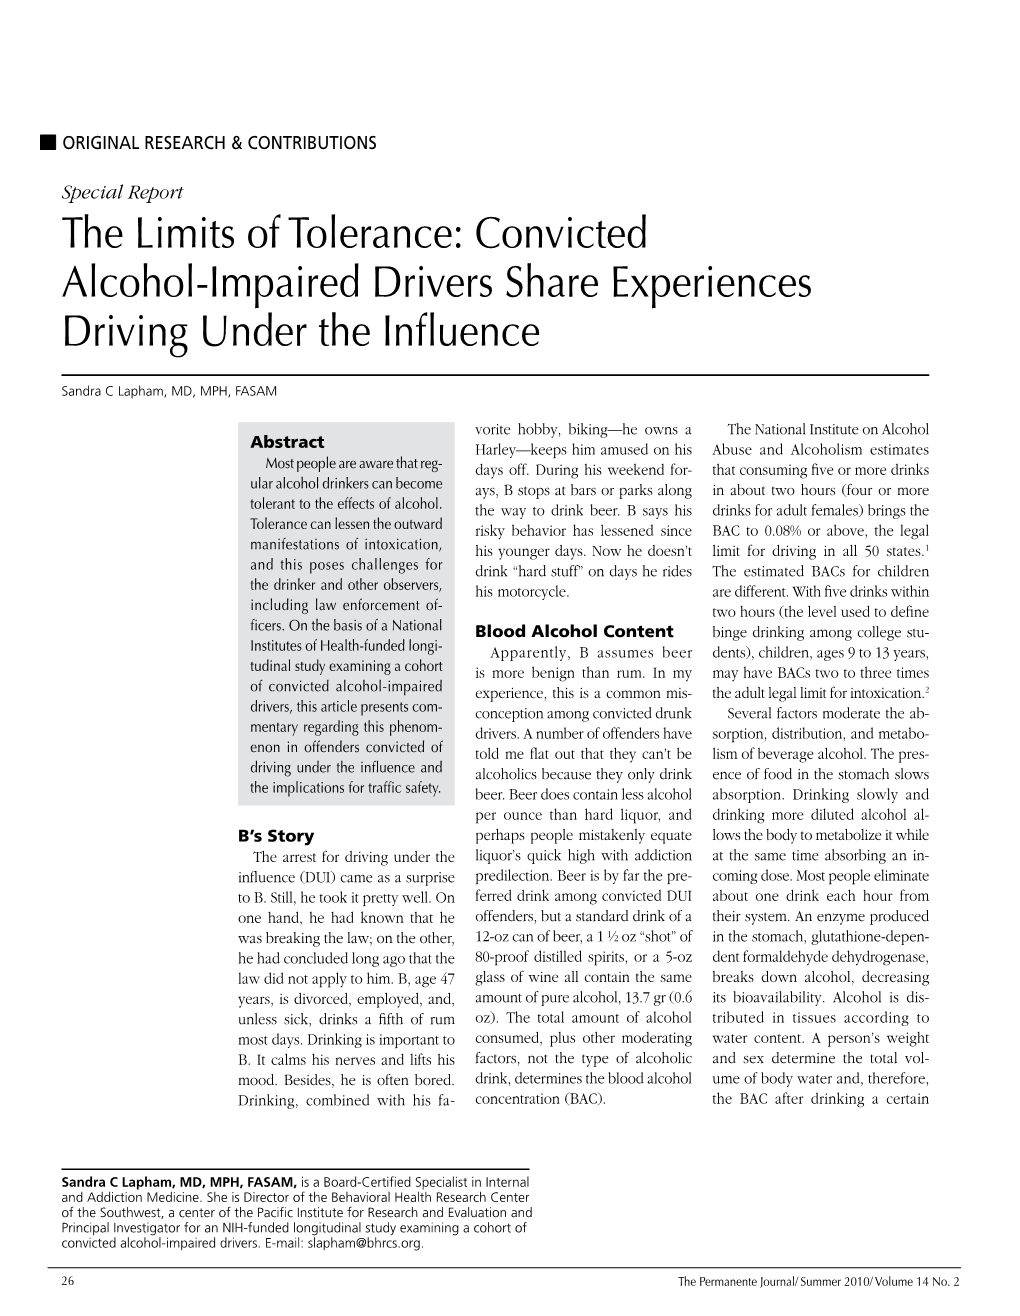 The Limits of Tolerance: Convicted Alcohol-Impaired Drivers Share Experiences Driving Under the Influence